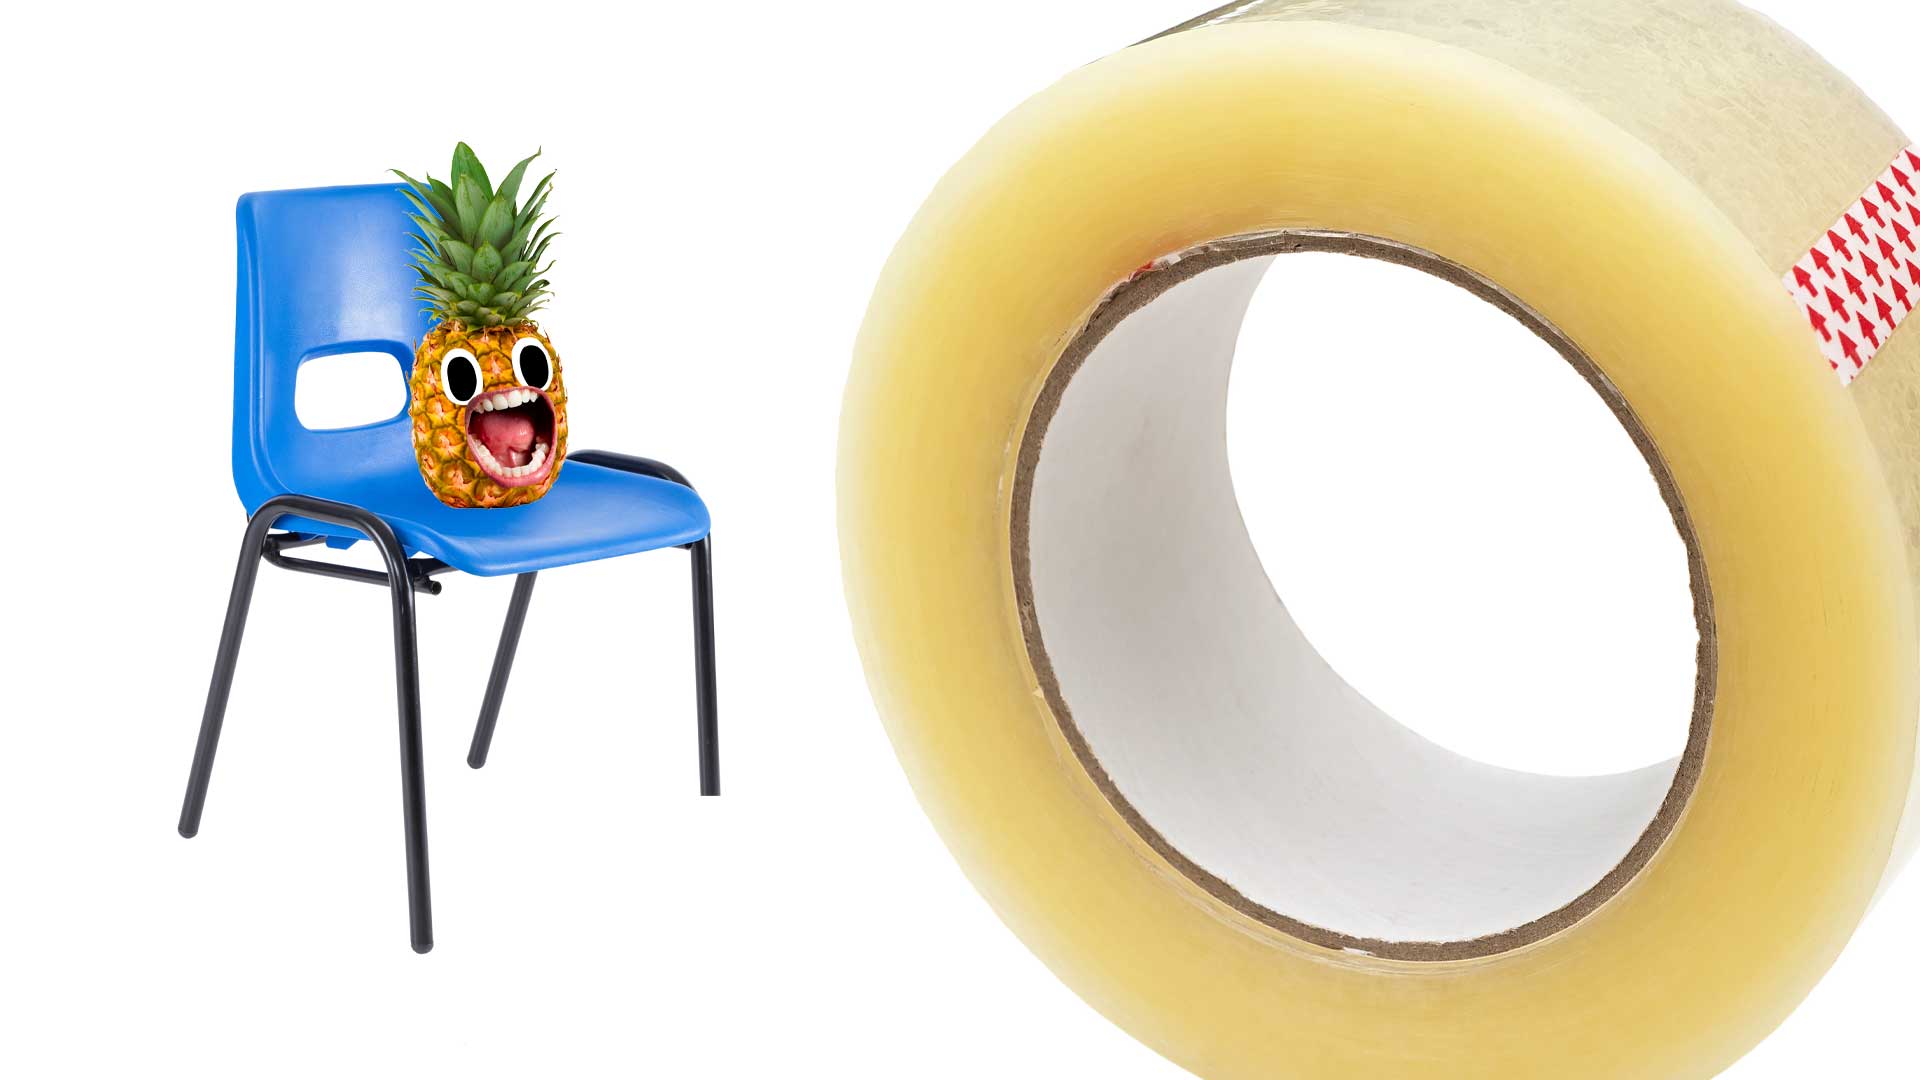 A pineapple and a roll of sticky tape